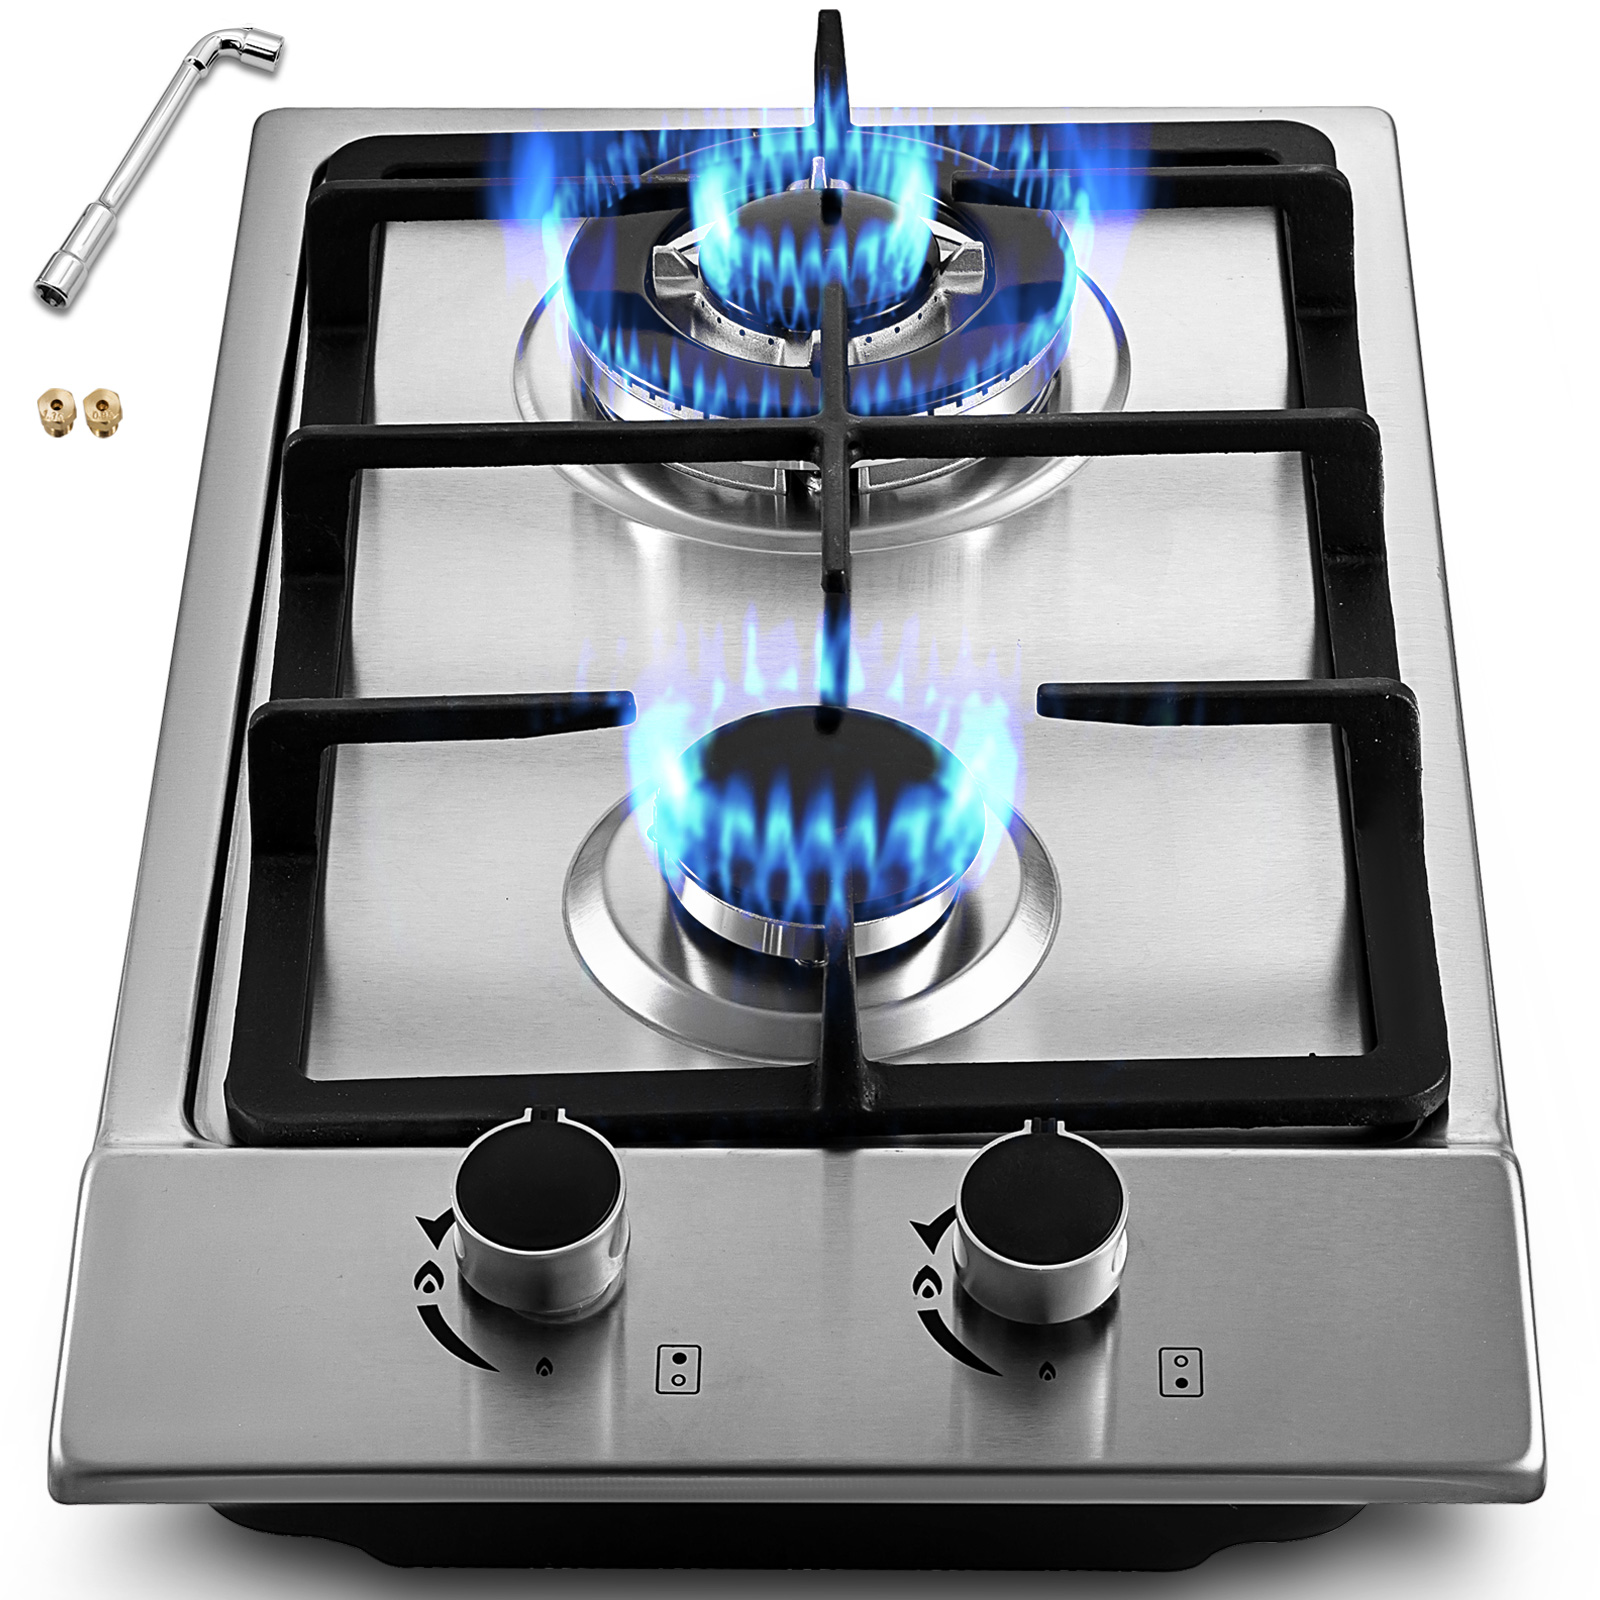 Stainless Steel 2 Burners Gas Stove Hob Cooktop Kitchen Outdoor